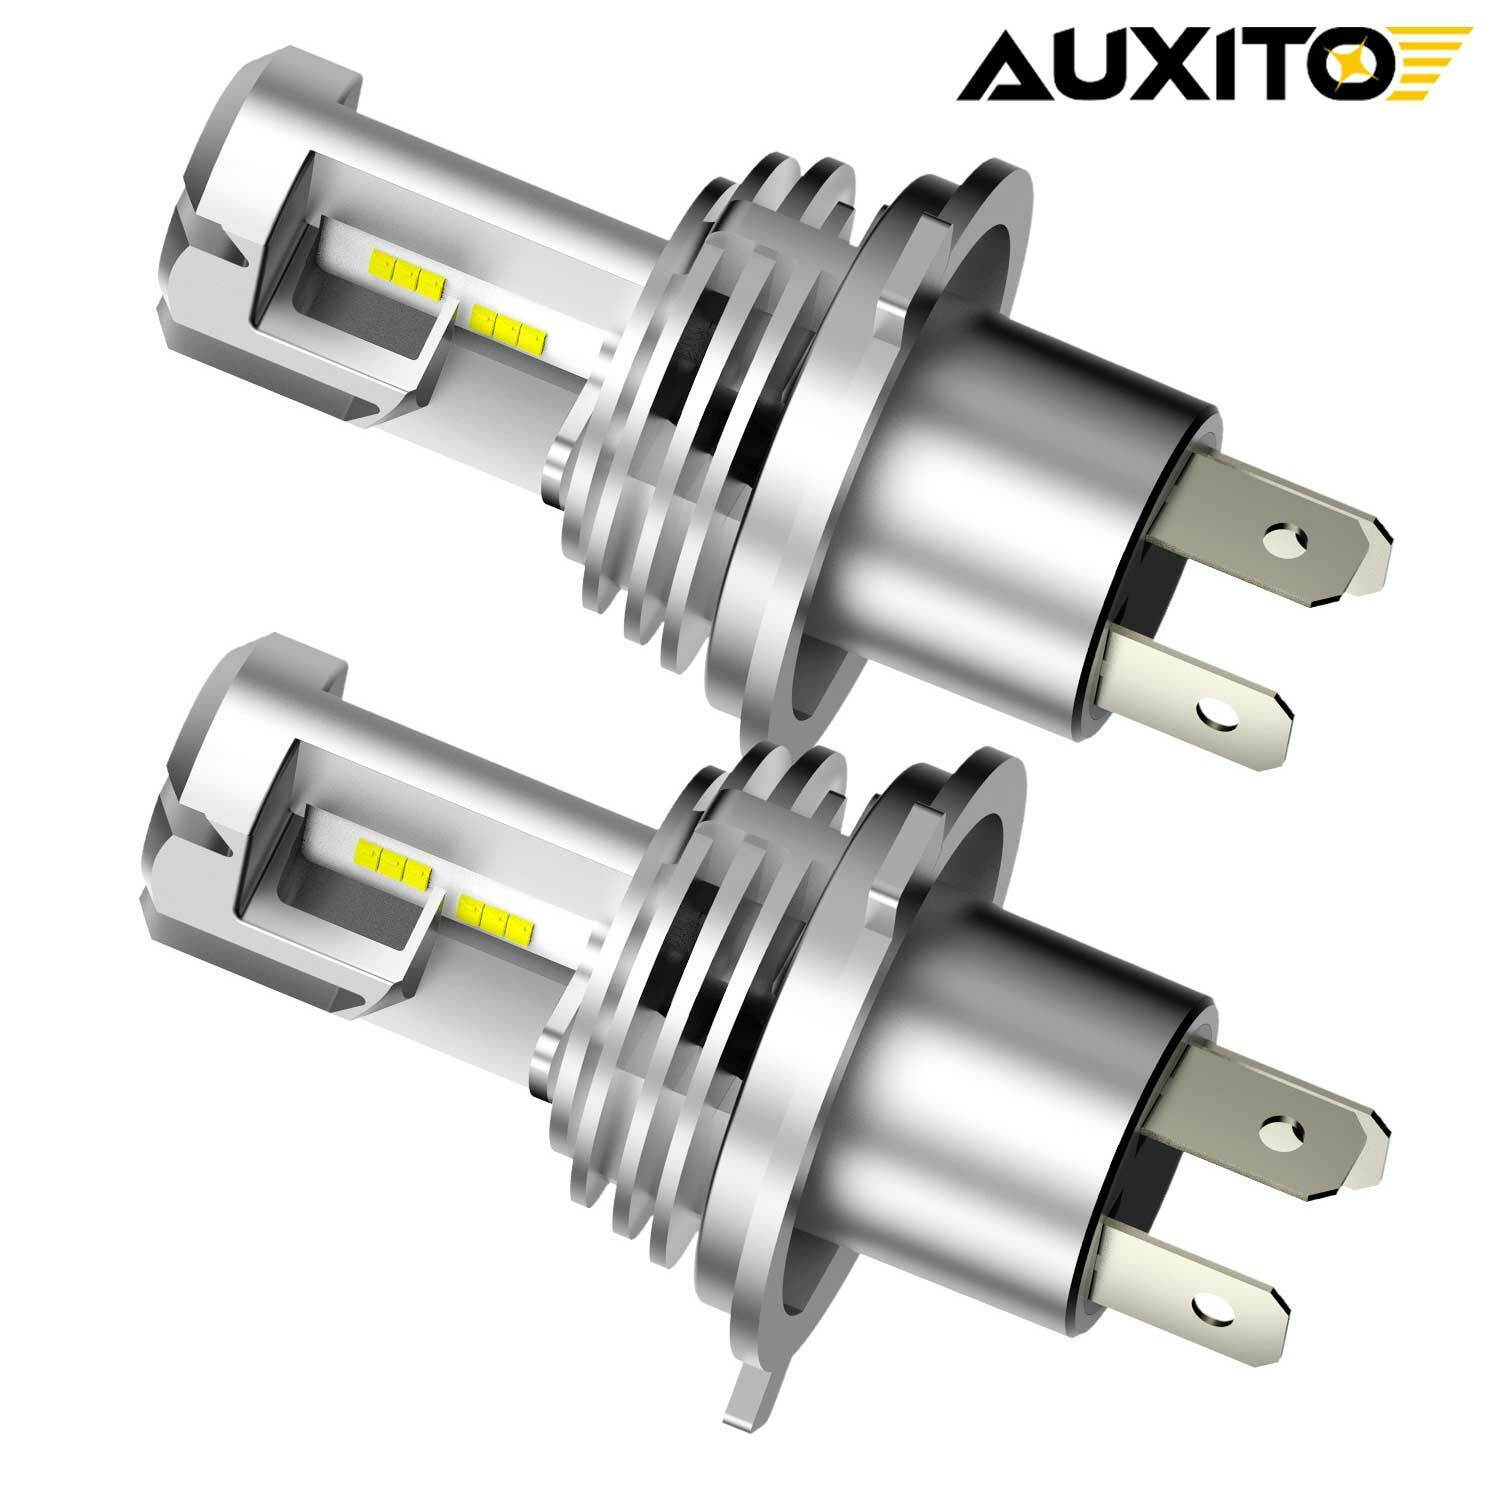 AUXITO LED Headlight Bulb H4 9003 HB2 Combo Kit High Low Beam Super White CANBUS